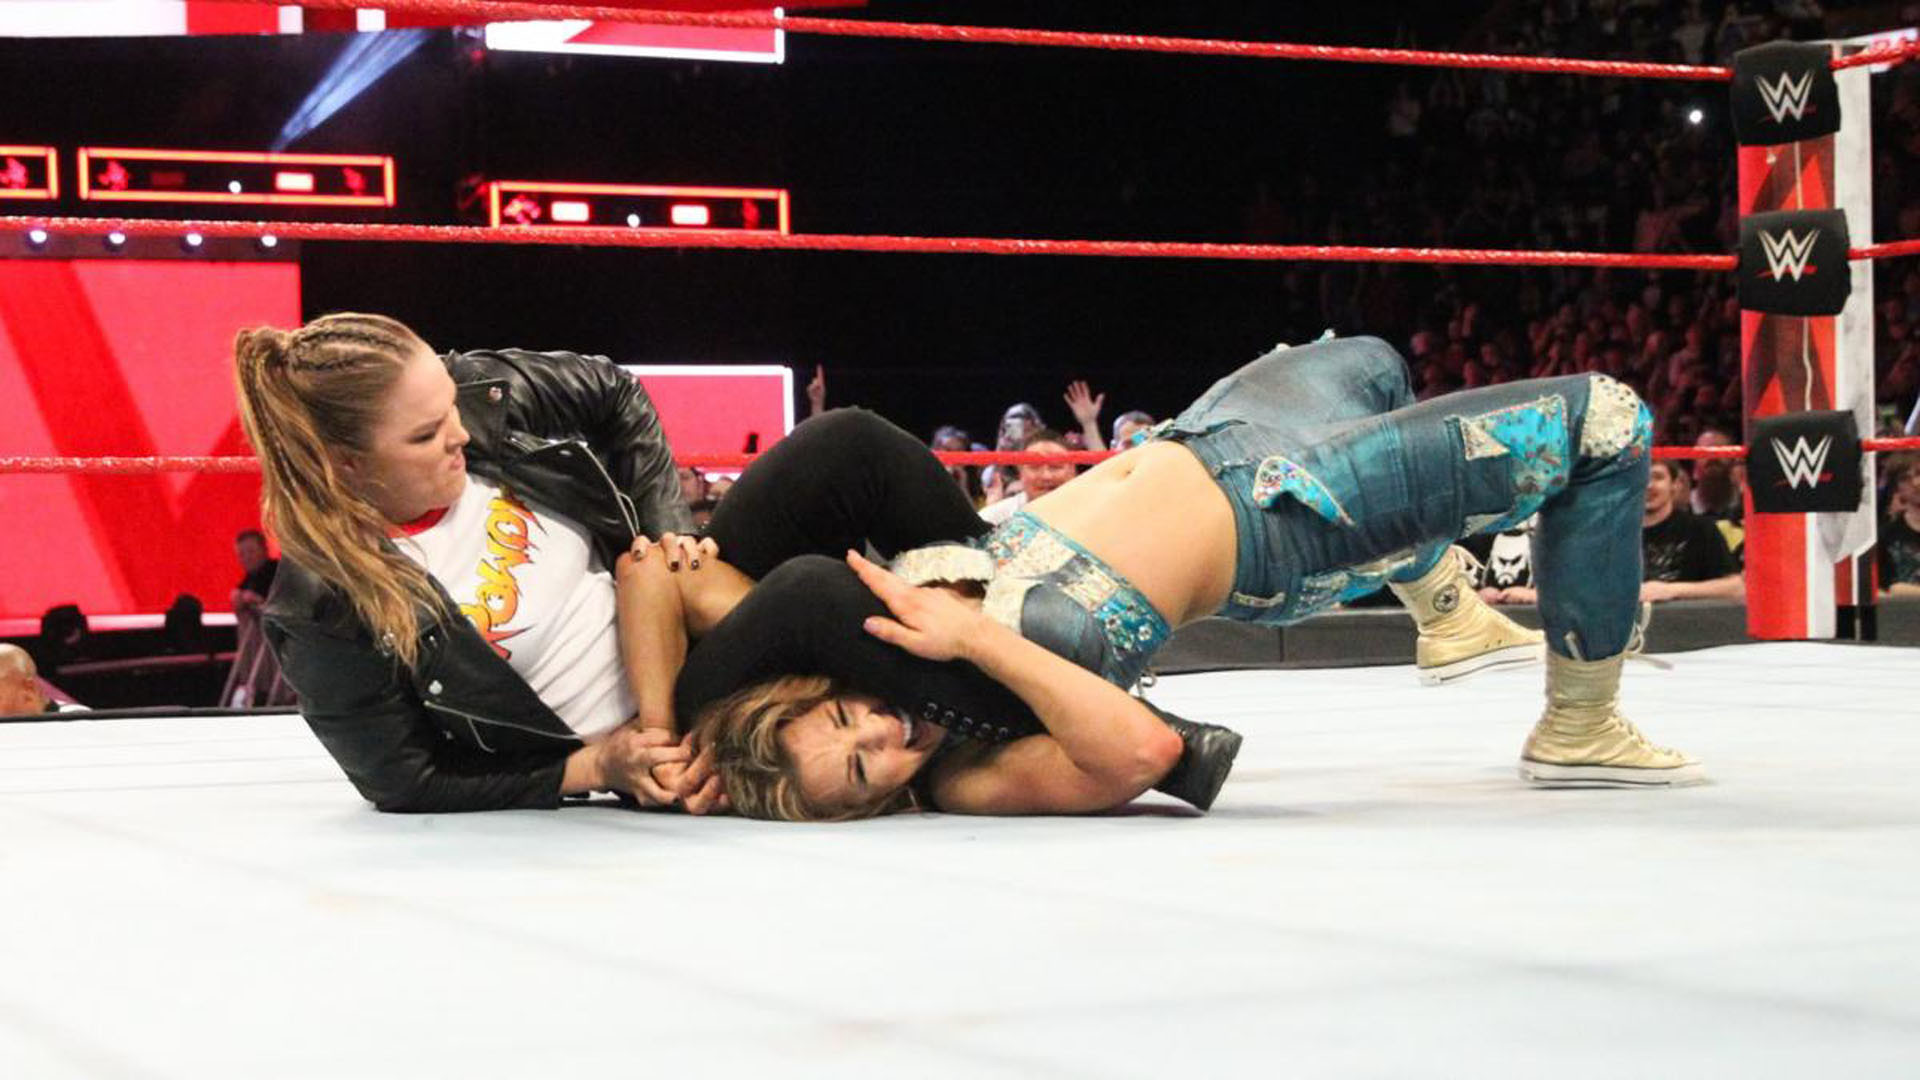 Wwe Raw Ronda Rousey Rescues Natalya From Attack By Mickie James 1920x1080